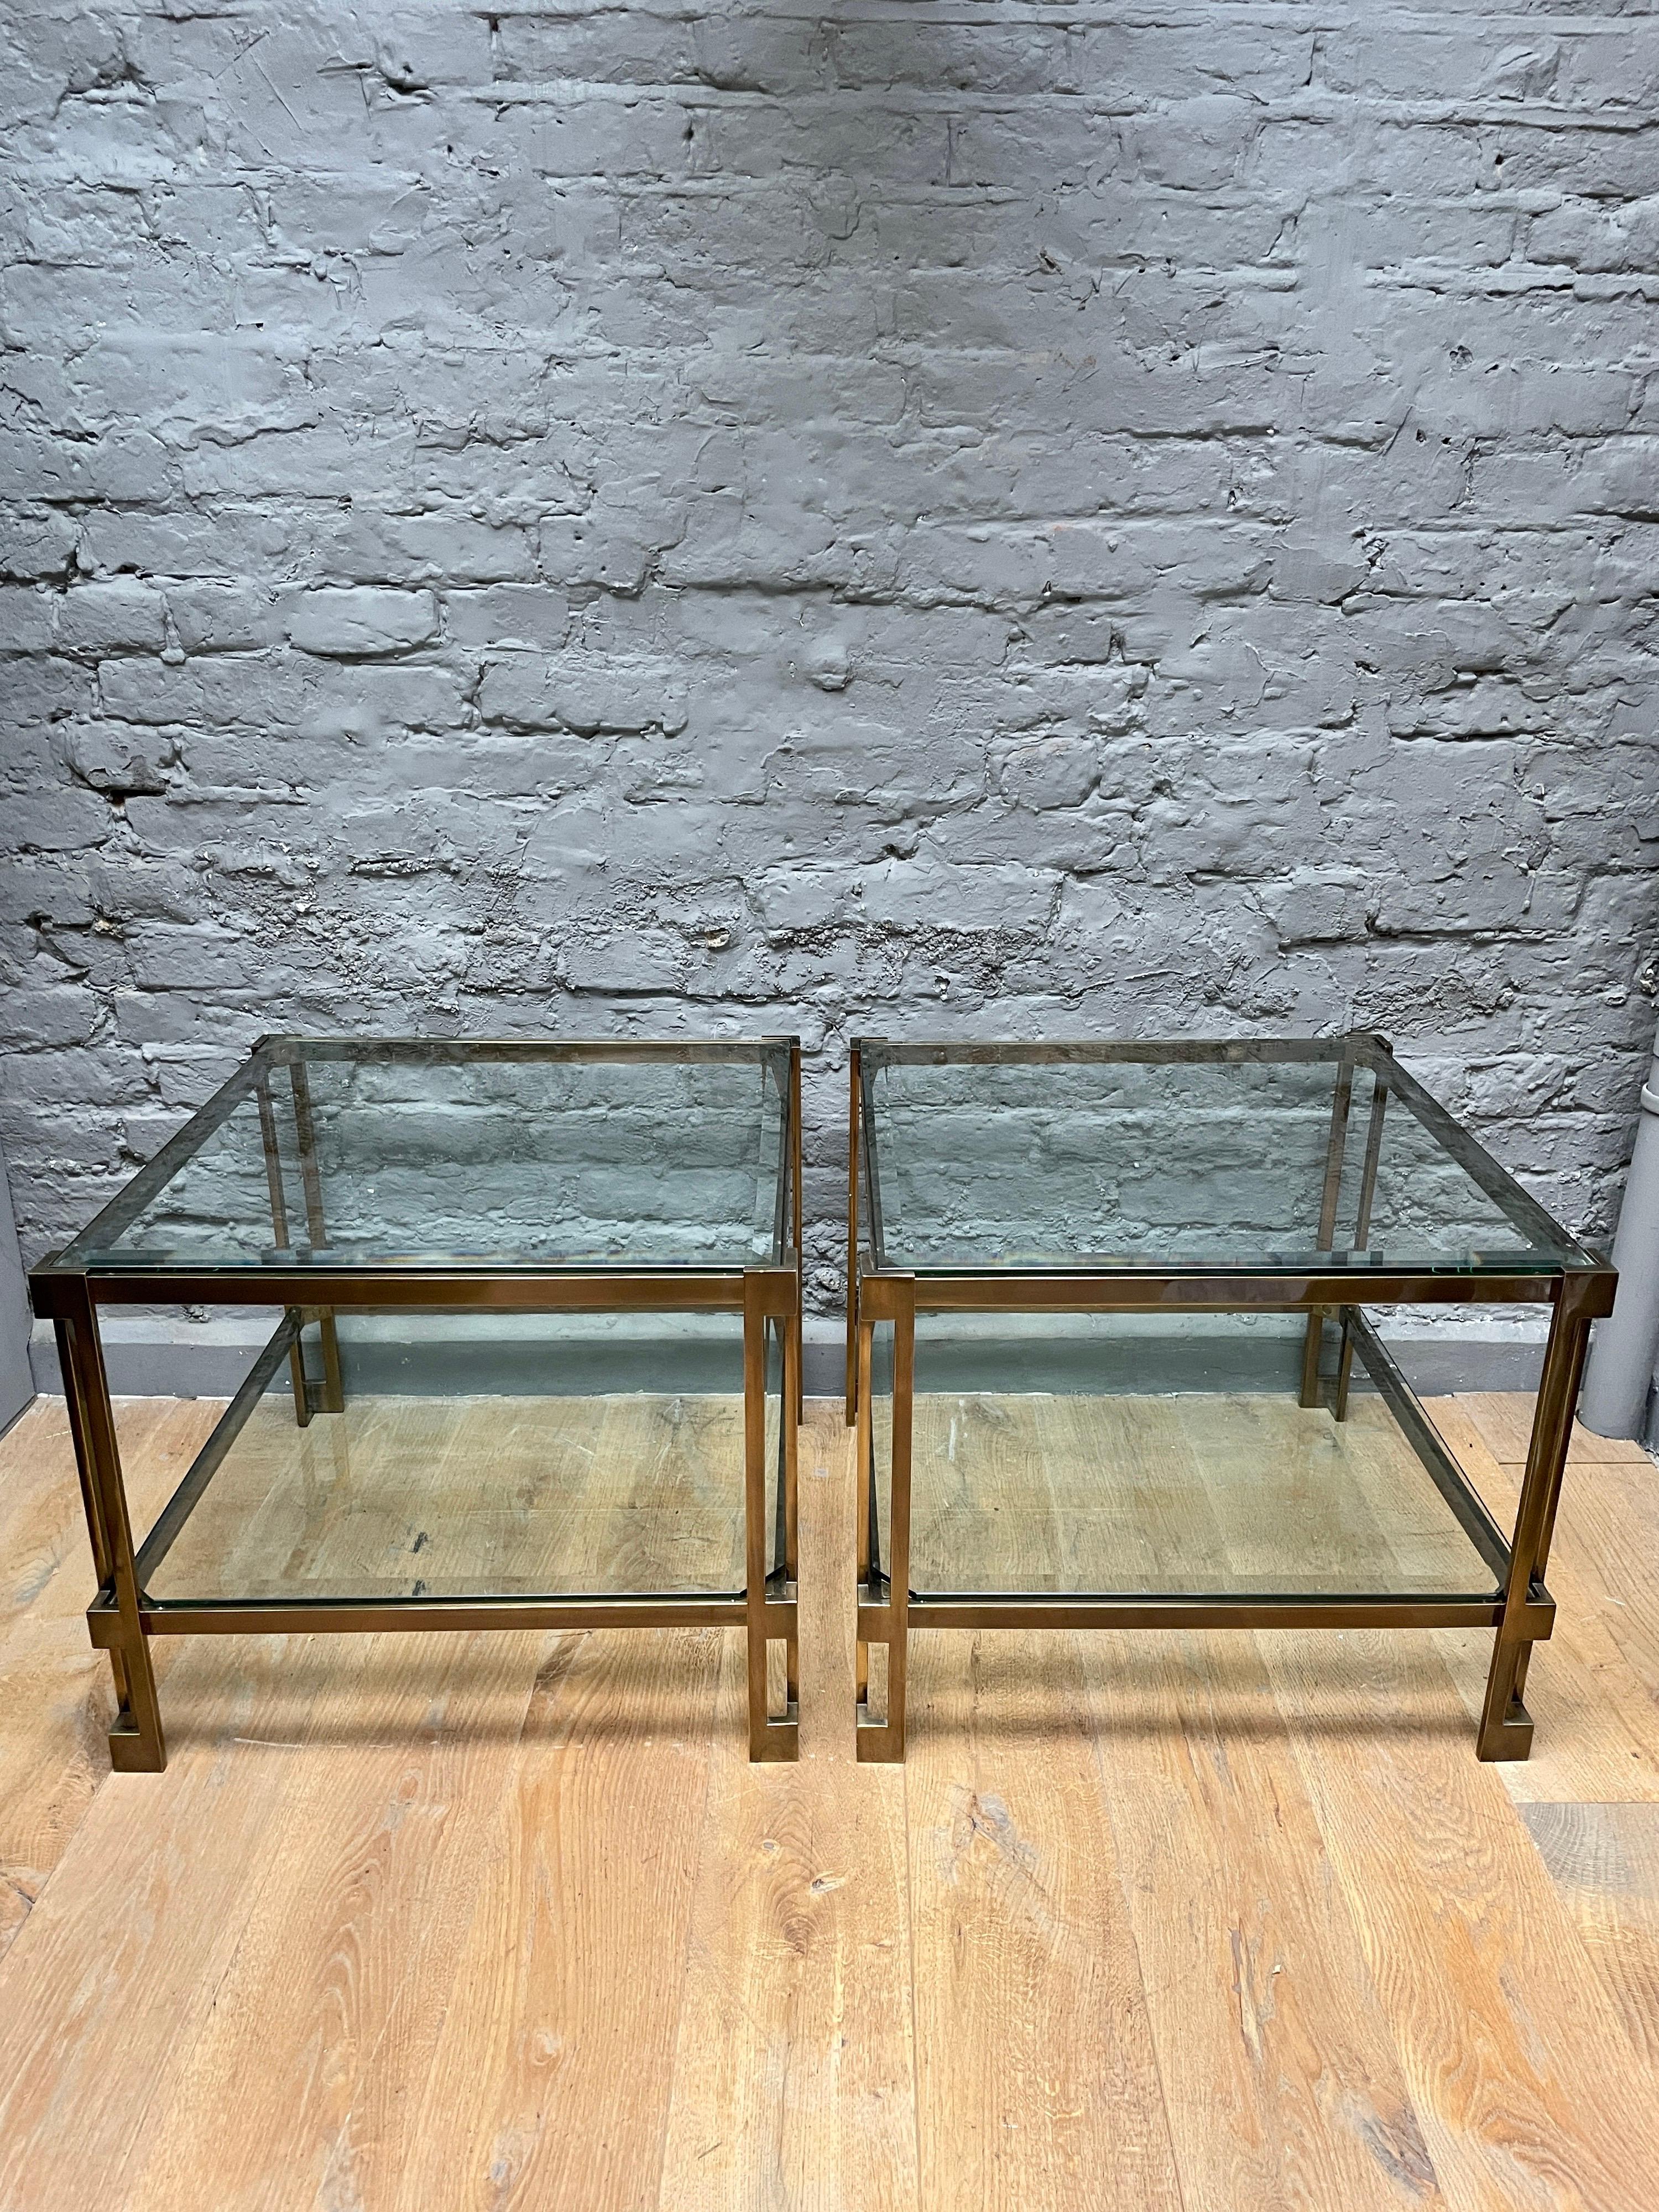 A substantial and very good quality pair of patinated brass two tiered tables, architectural in design with bevelled glass plates. In very good condition with a squared aesthetic, angled columned opened supports. The brass with a bronze colour